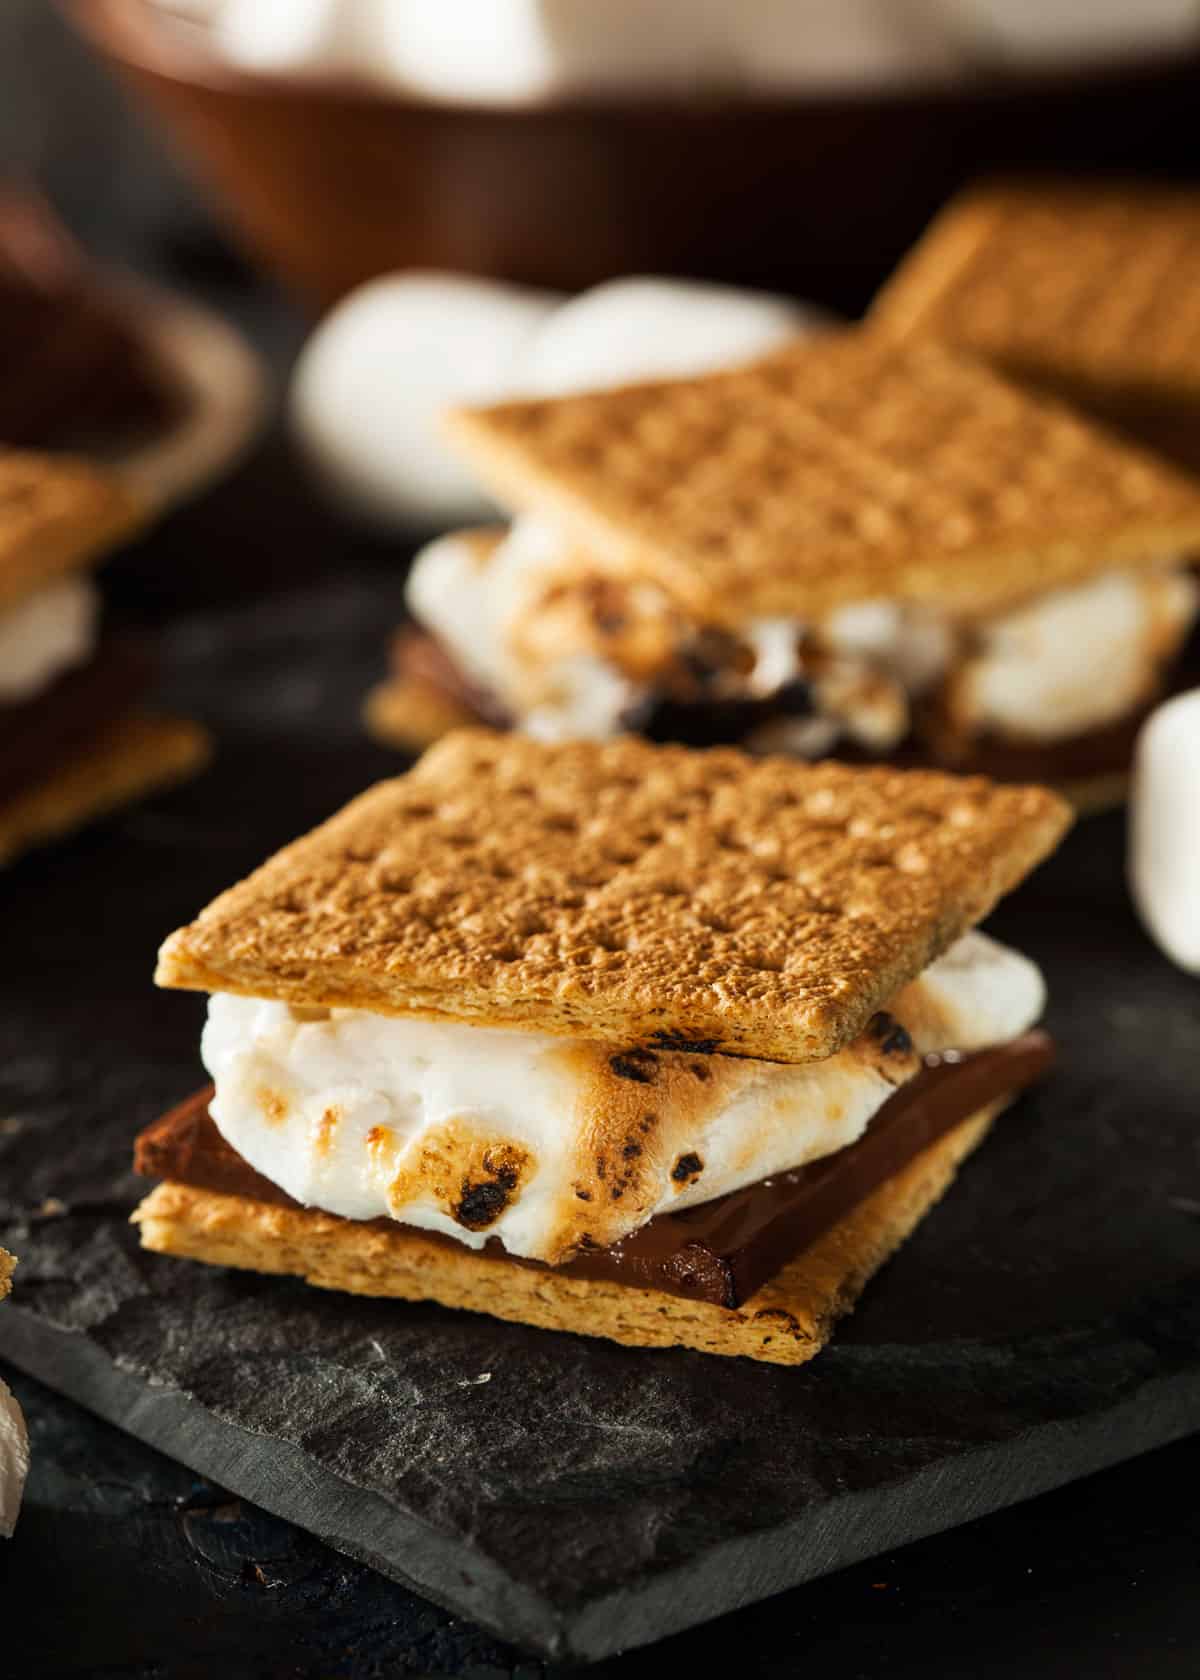 Cool camping gear smores